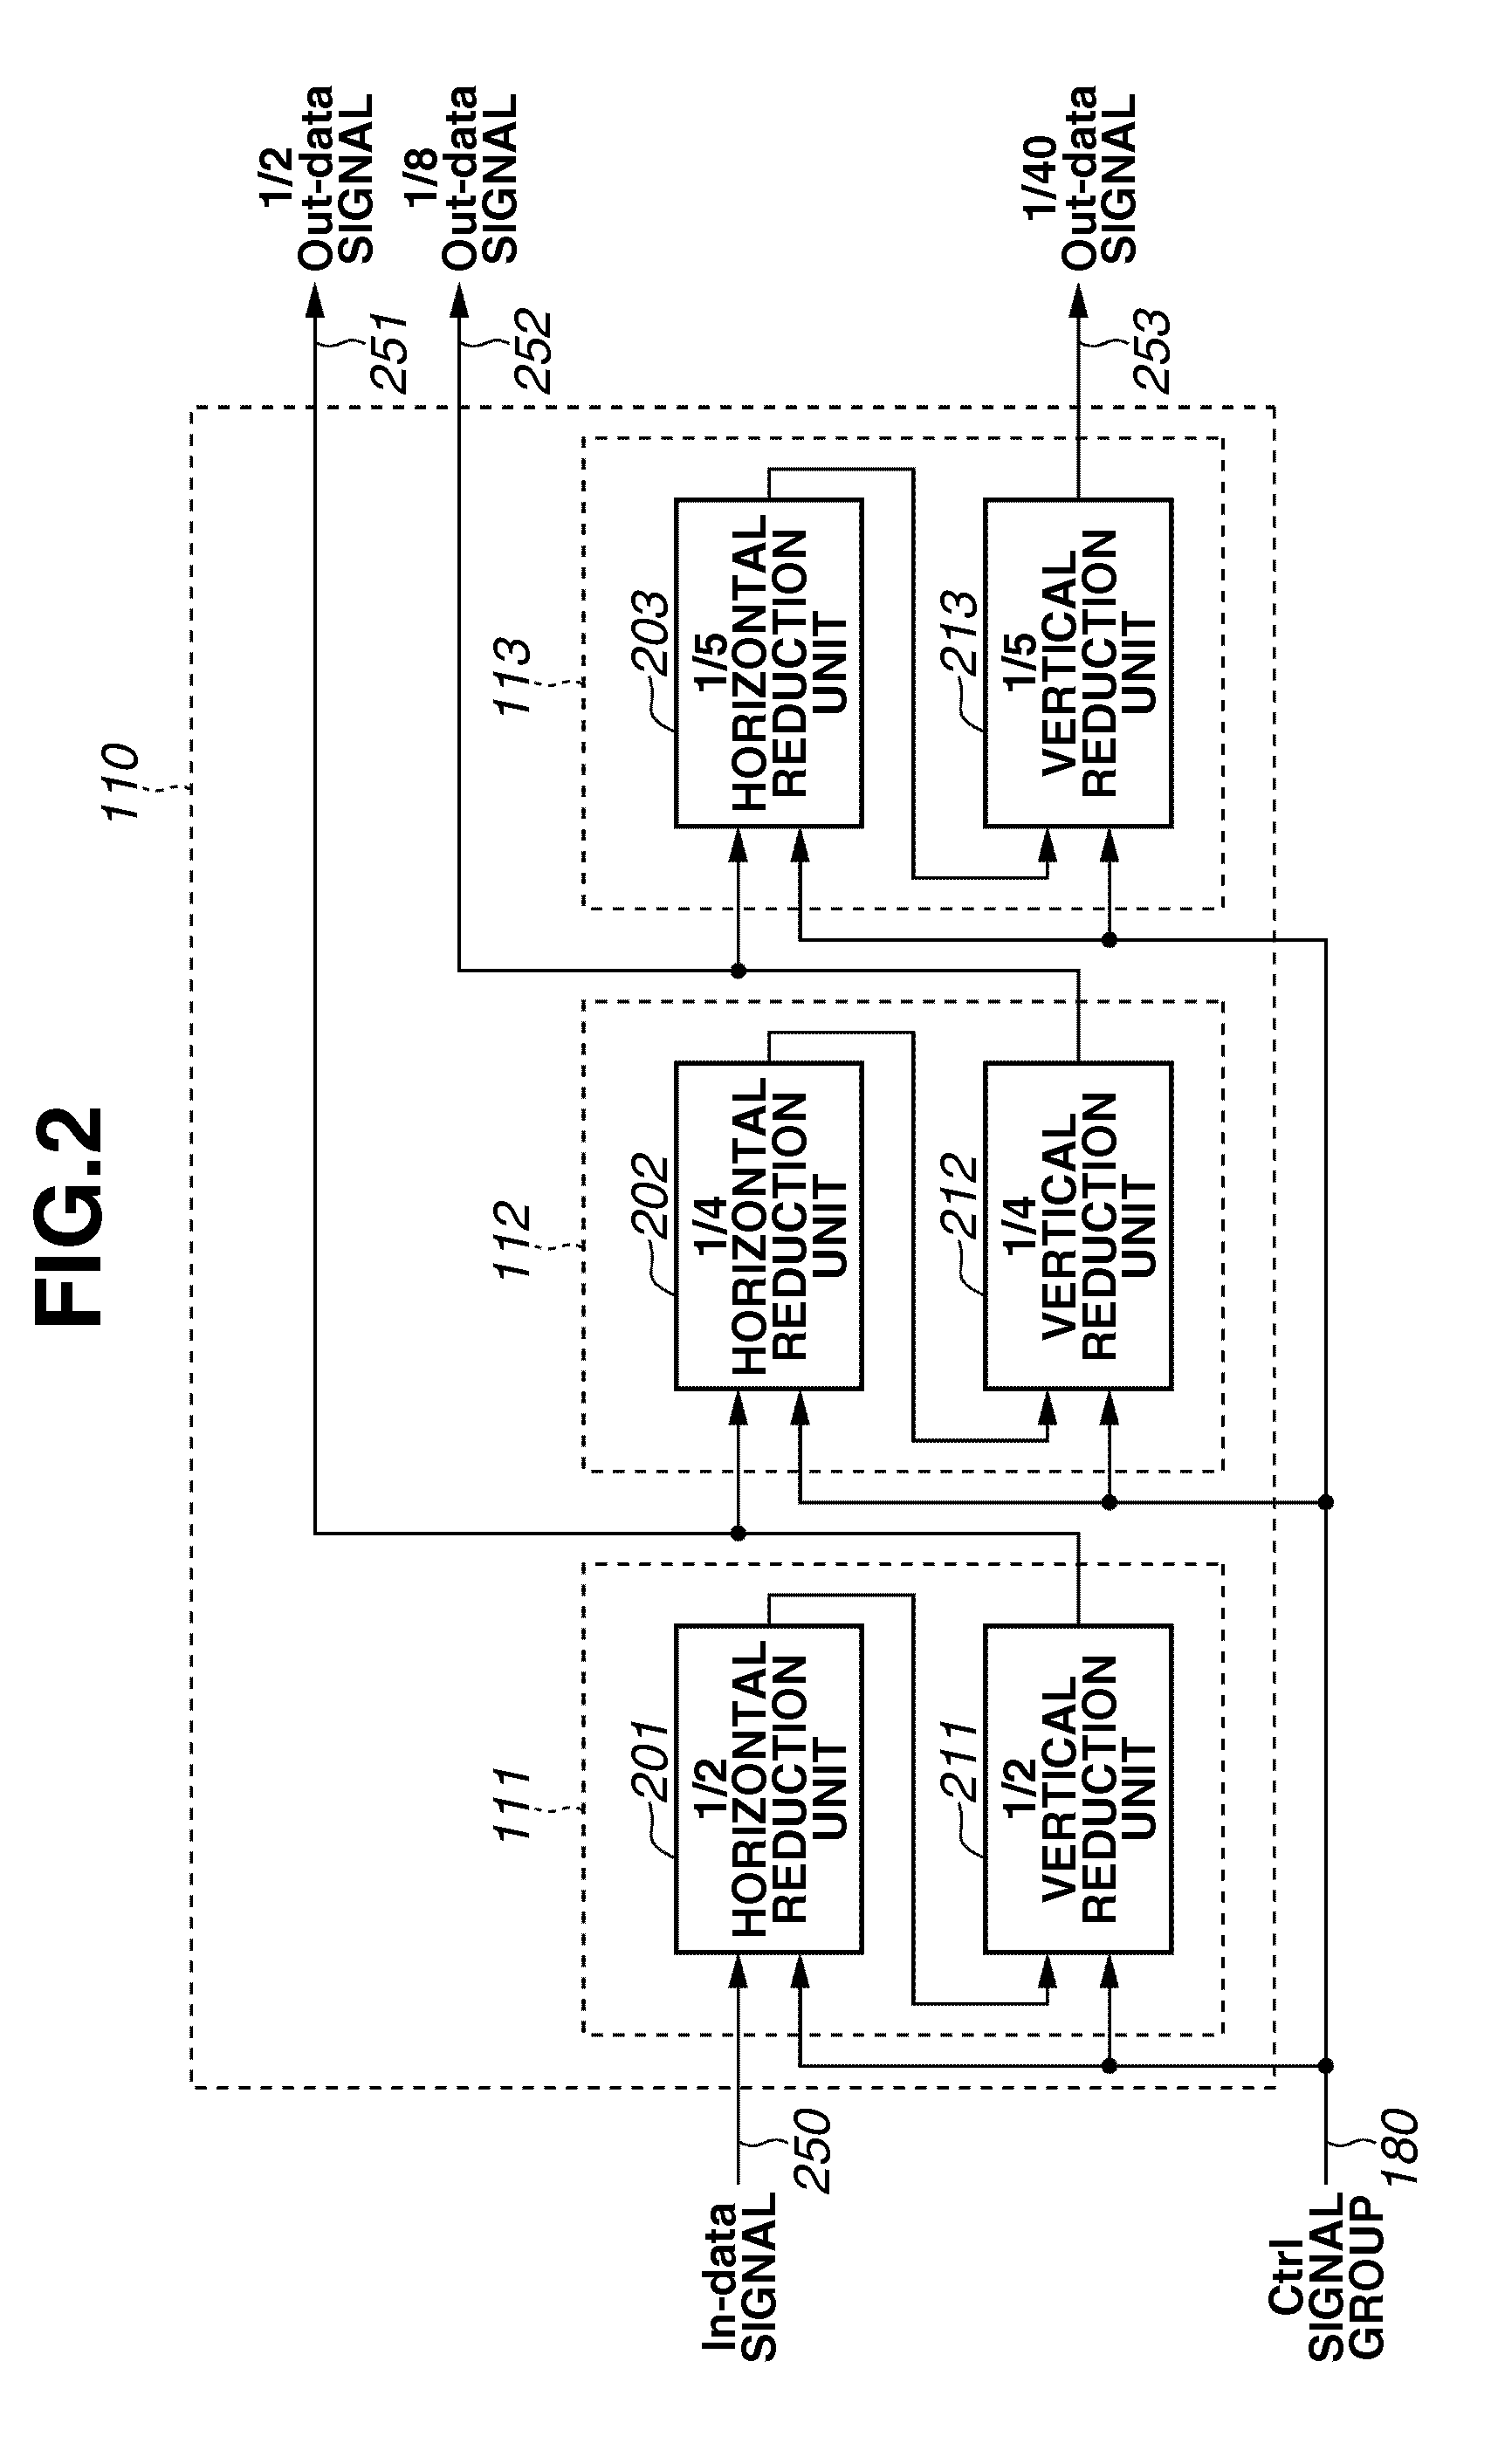 Image correction apparatus and method